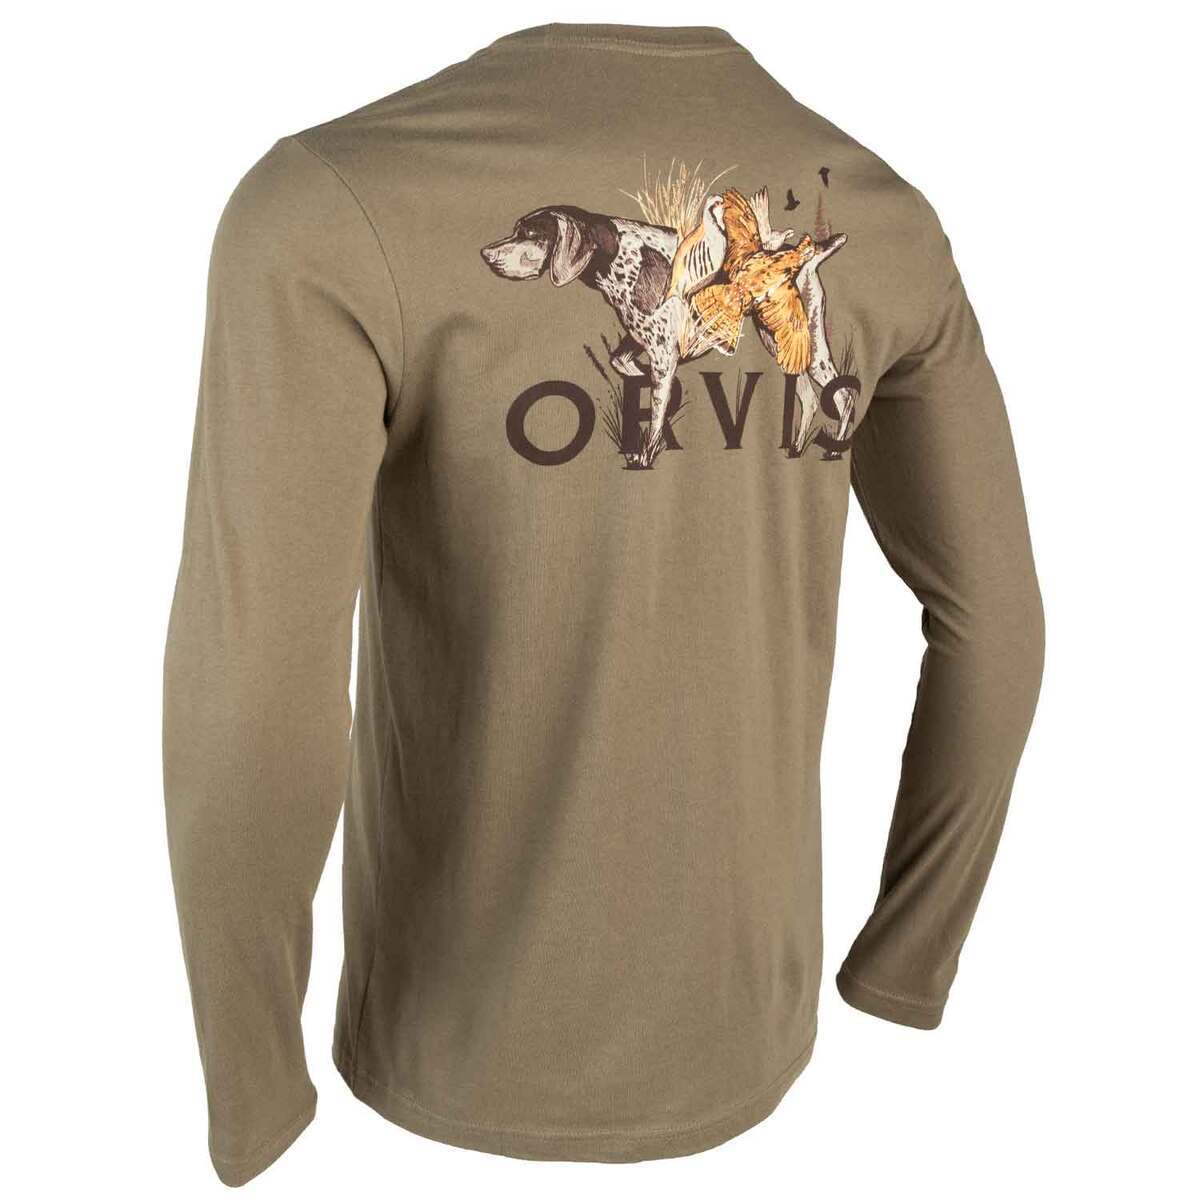 Orvis Men's GSP on Point Long Sleeve Casual Shirt - Olive L by Sportsman's Warehouse